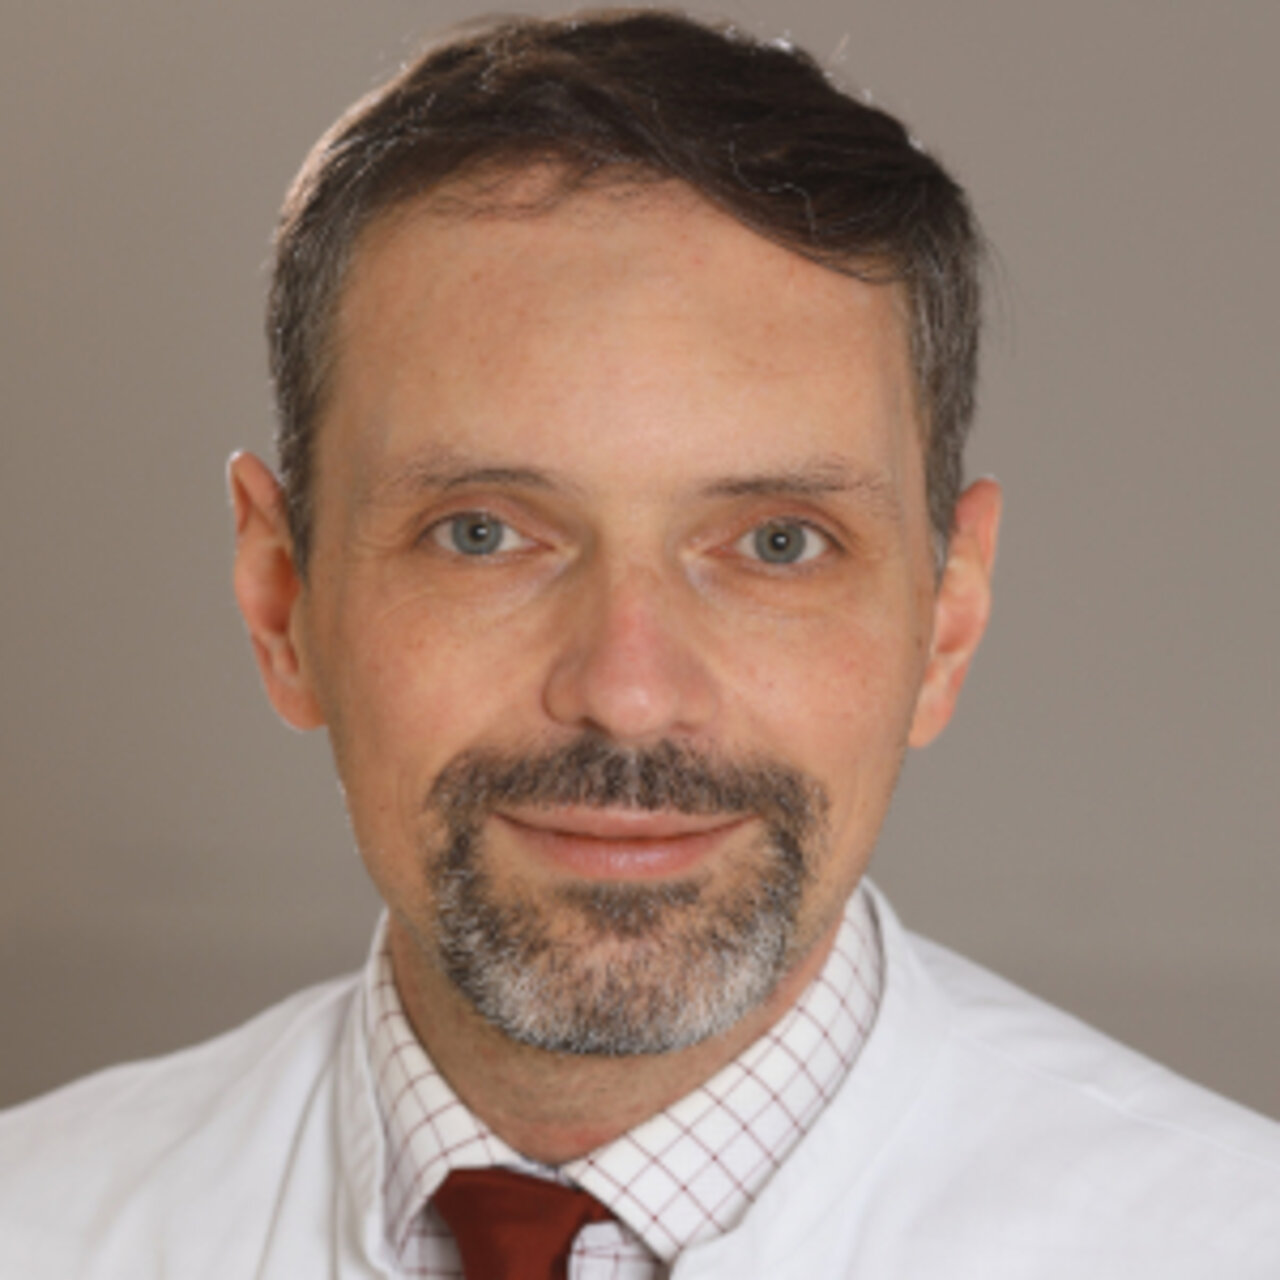 PD Dr Christian Arsov - Specialist in Prostate cancer - Portrait